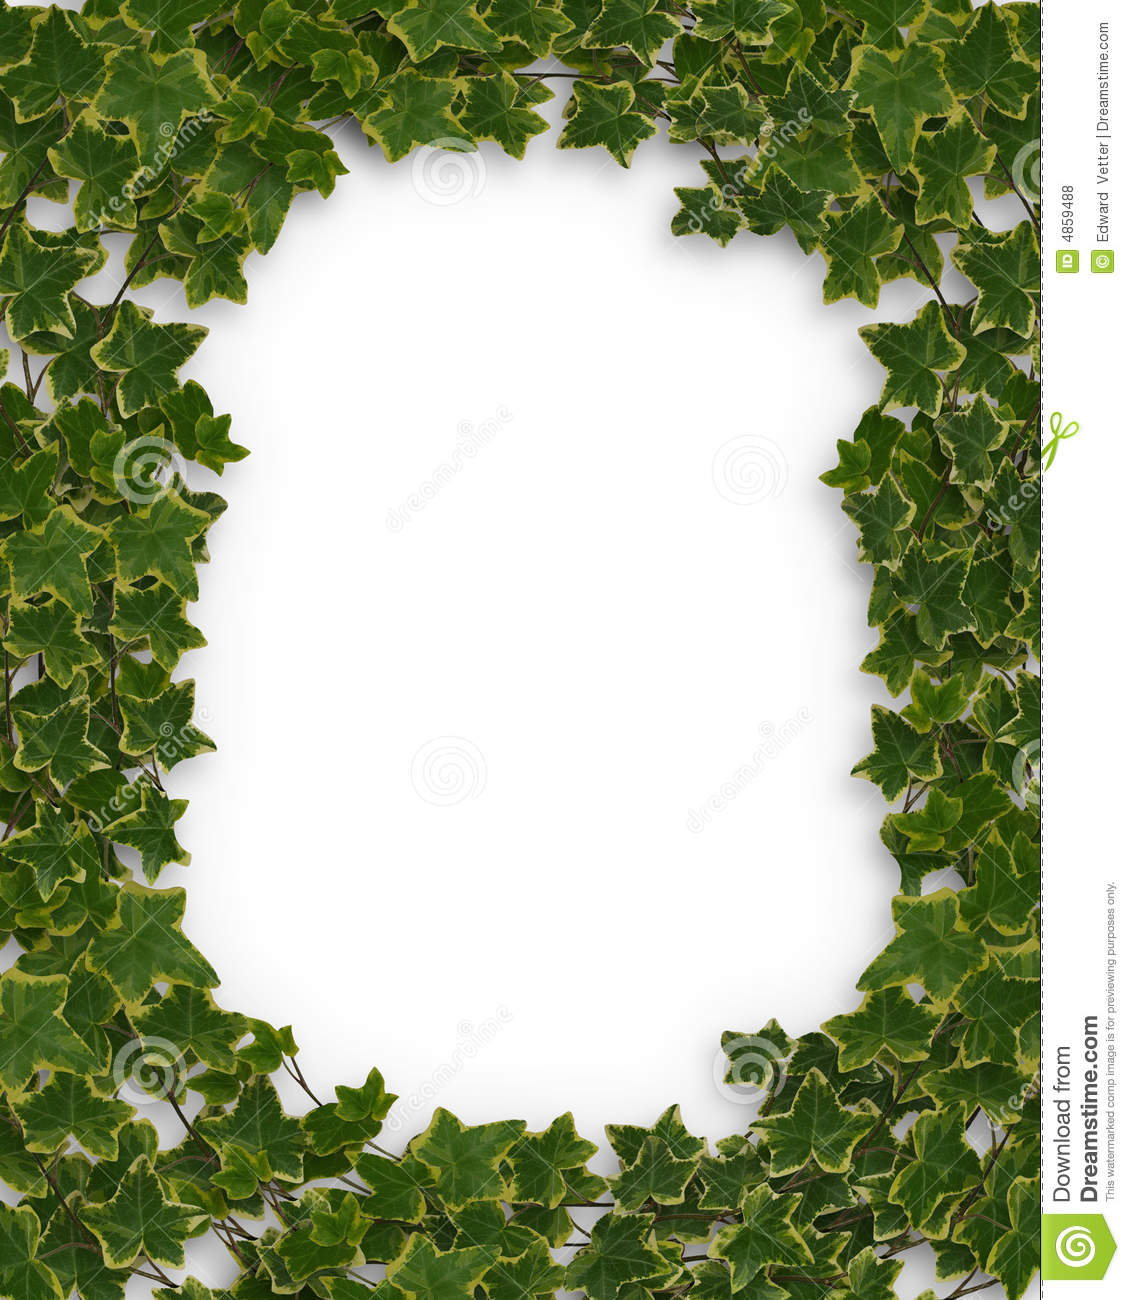 Ivy Leaves Image Composition For Background Greeting Card Border